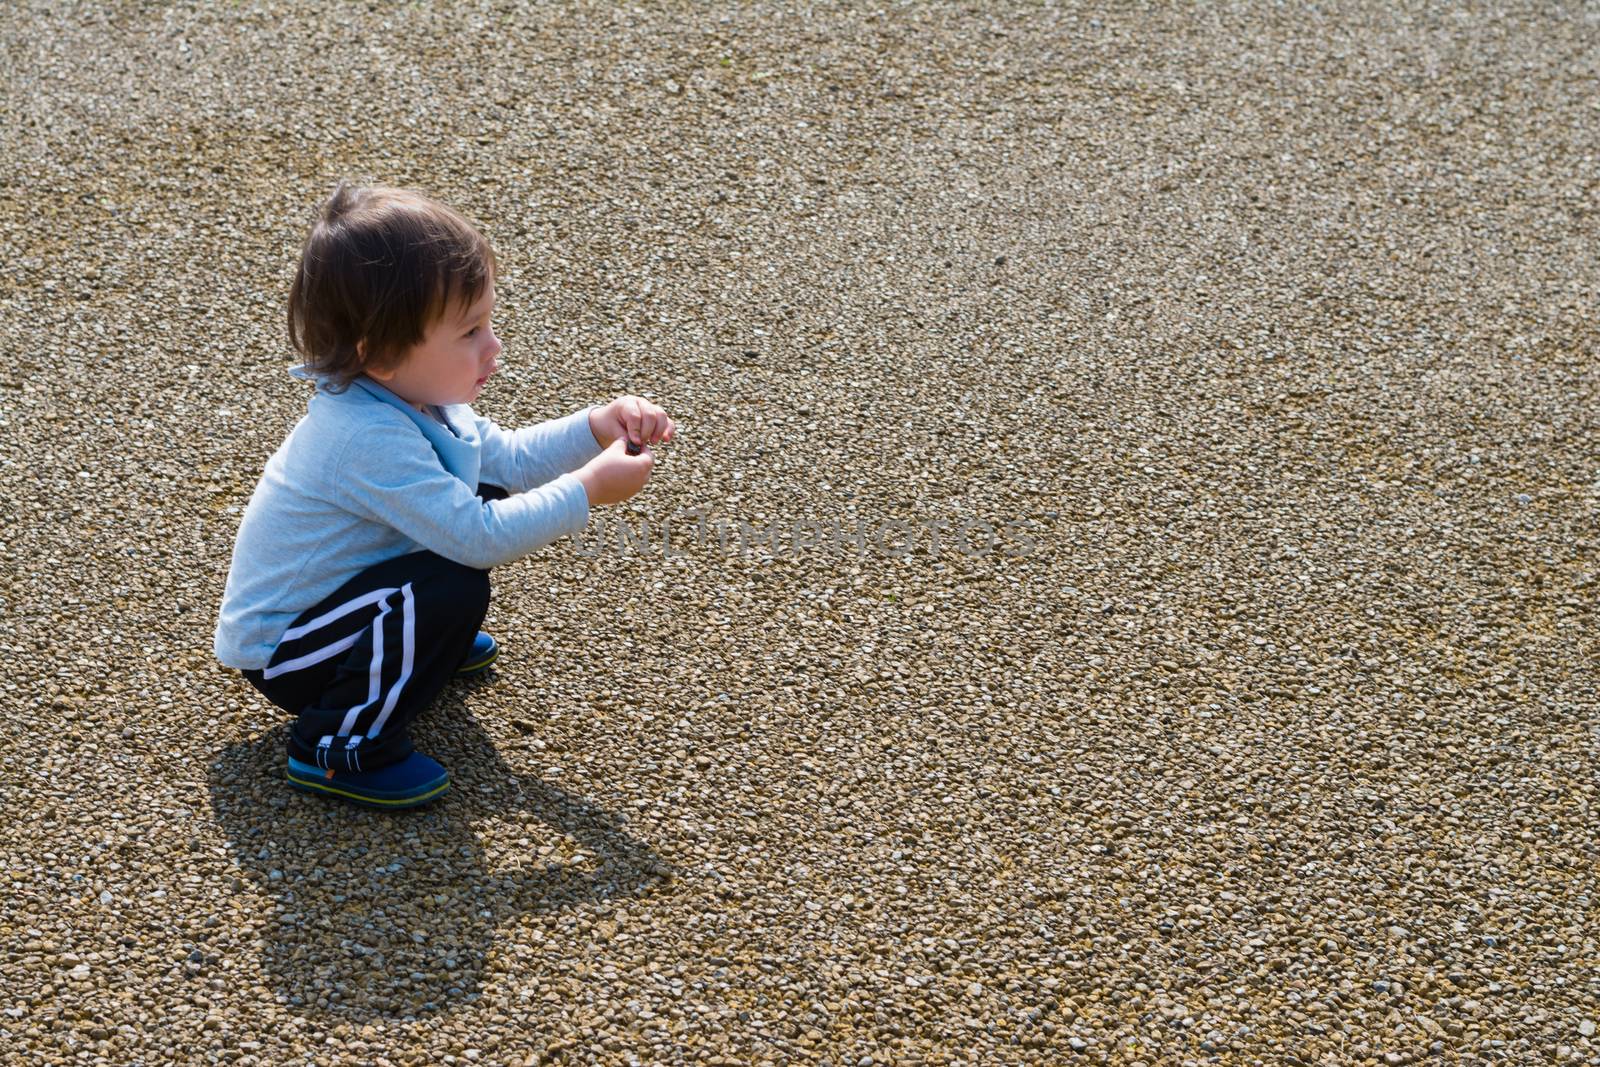 A 2 year old boy playing with a rock.